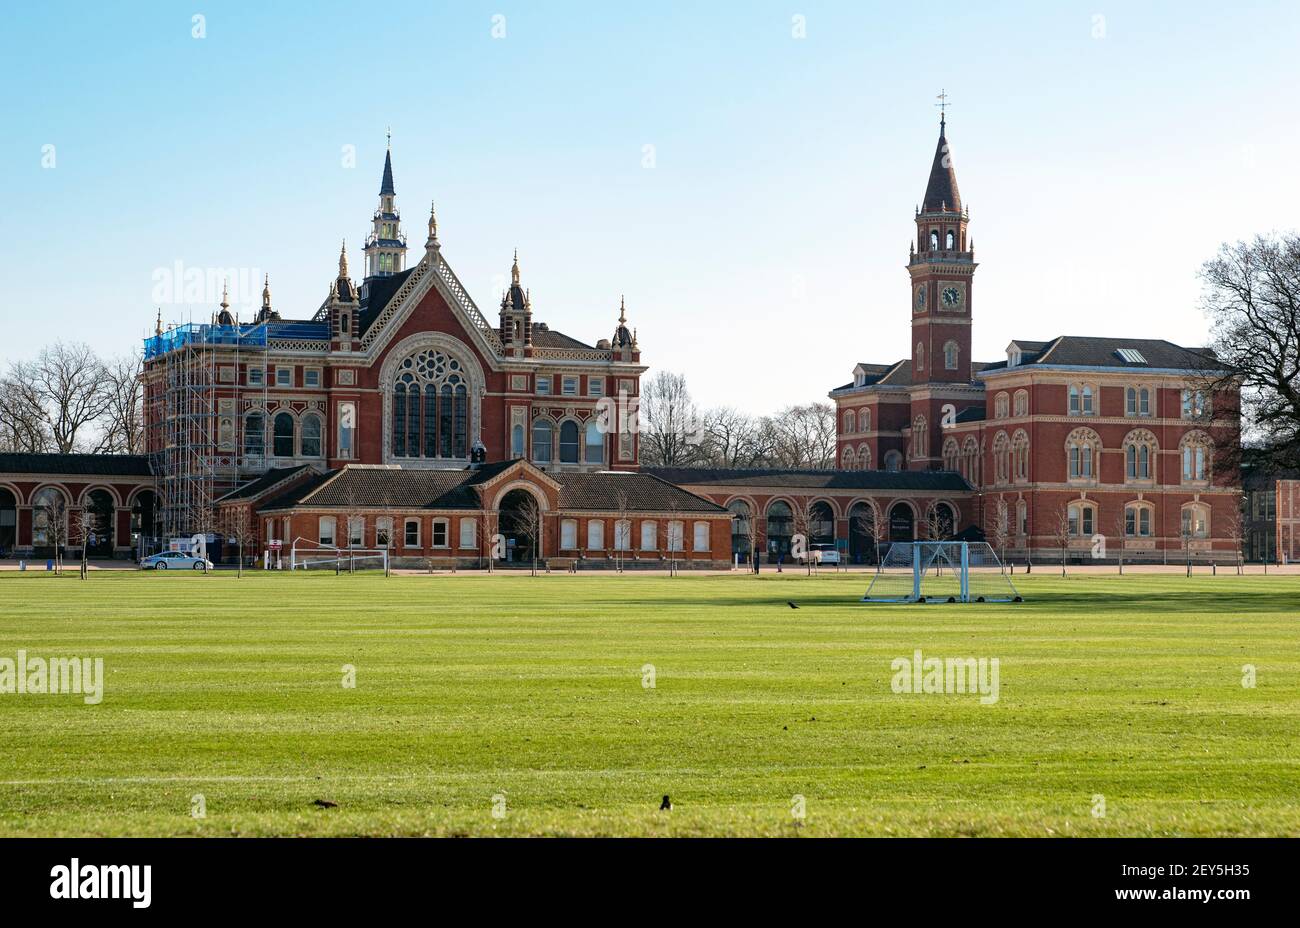 London, UK - February 27th 2021: Dulwich College in South East London Stock Photo